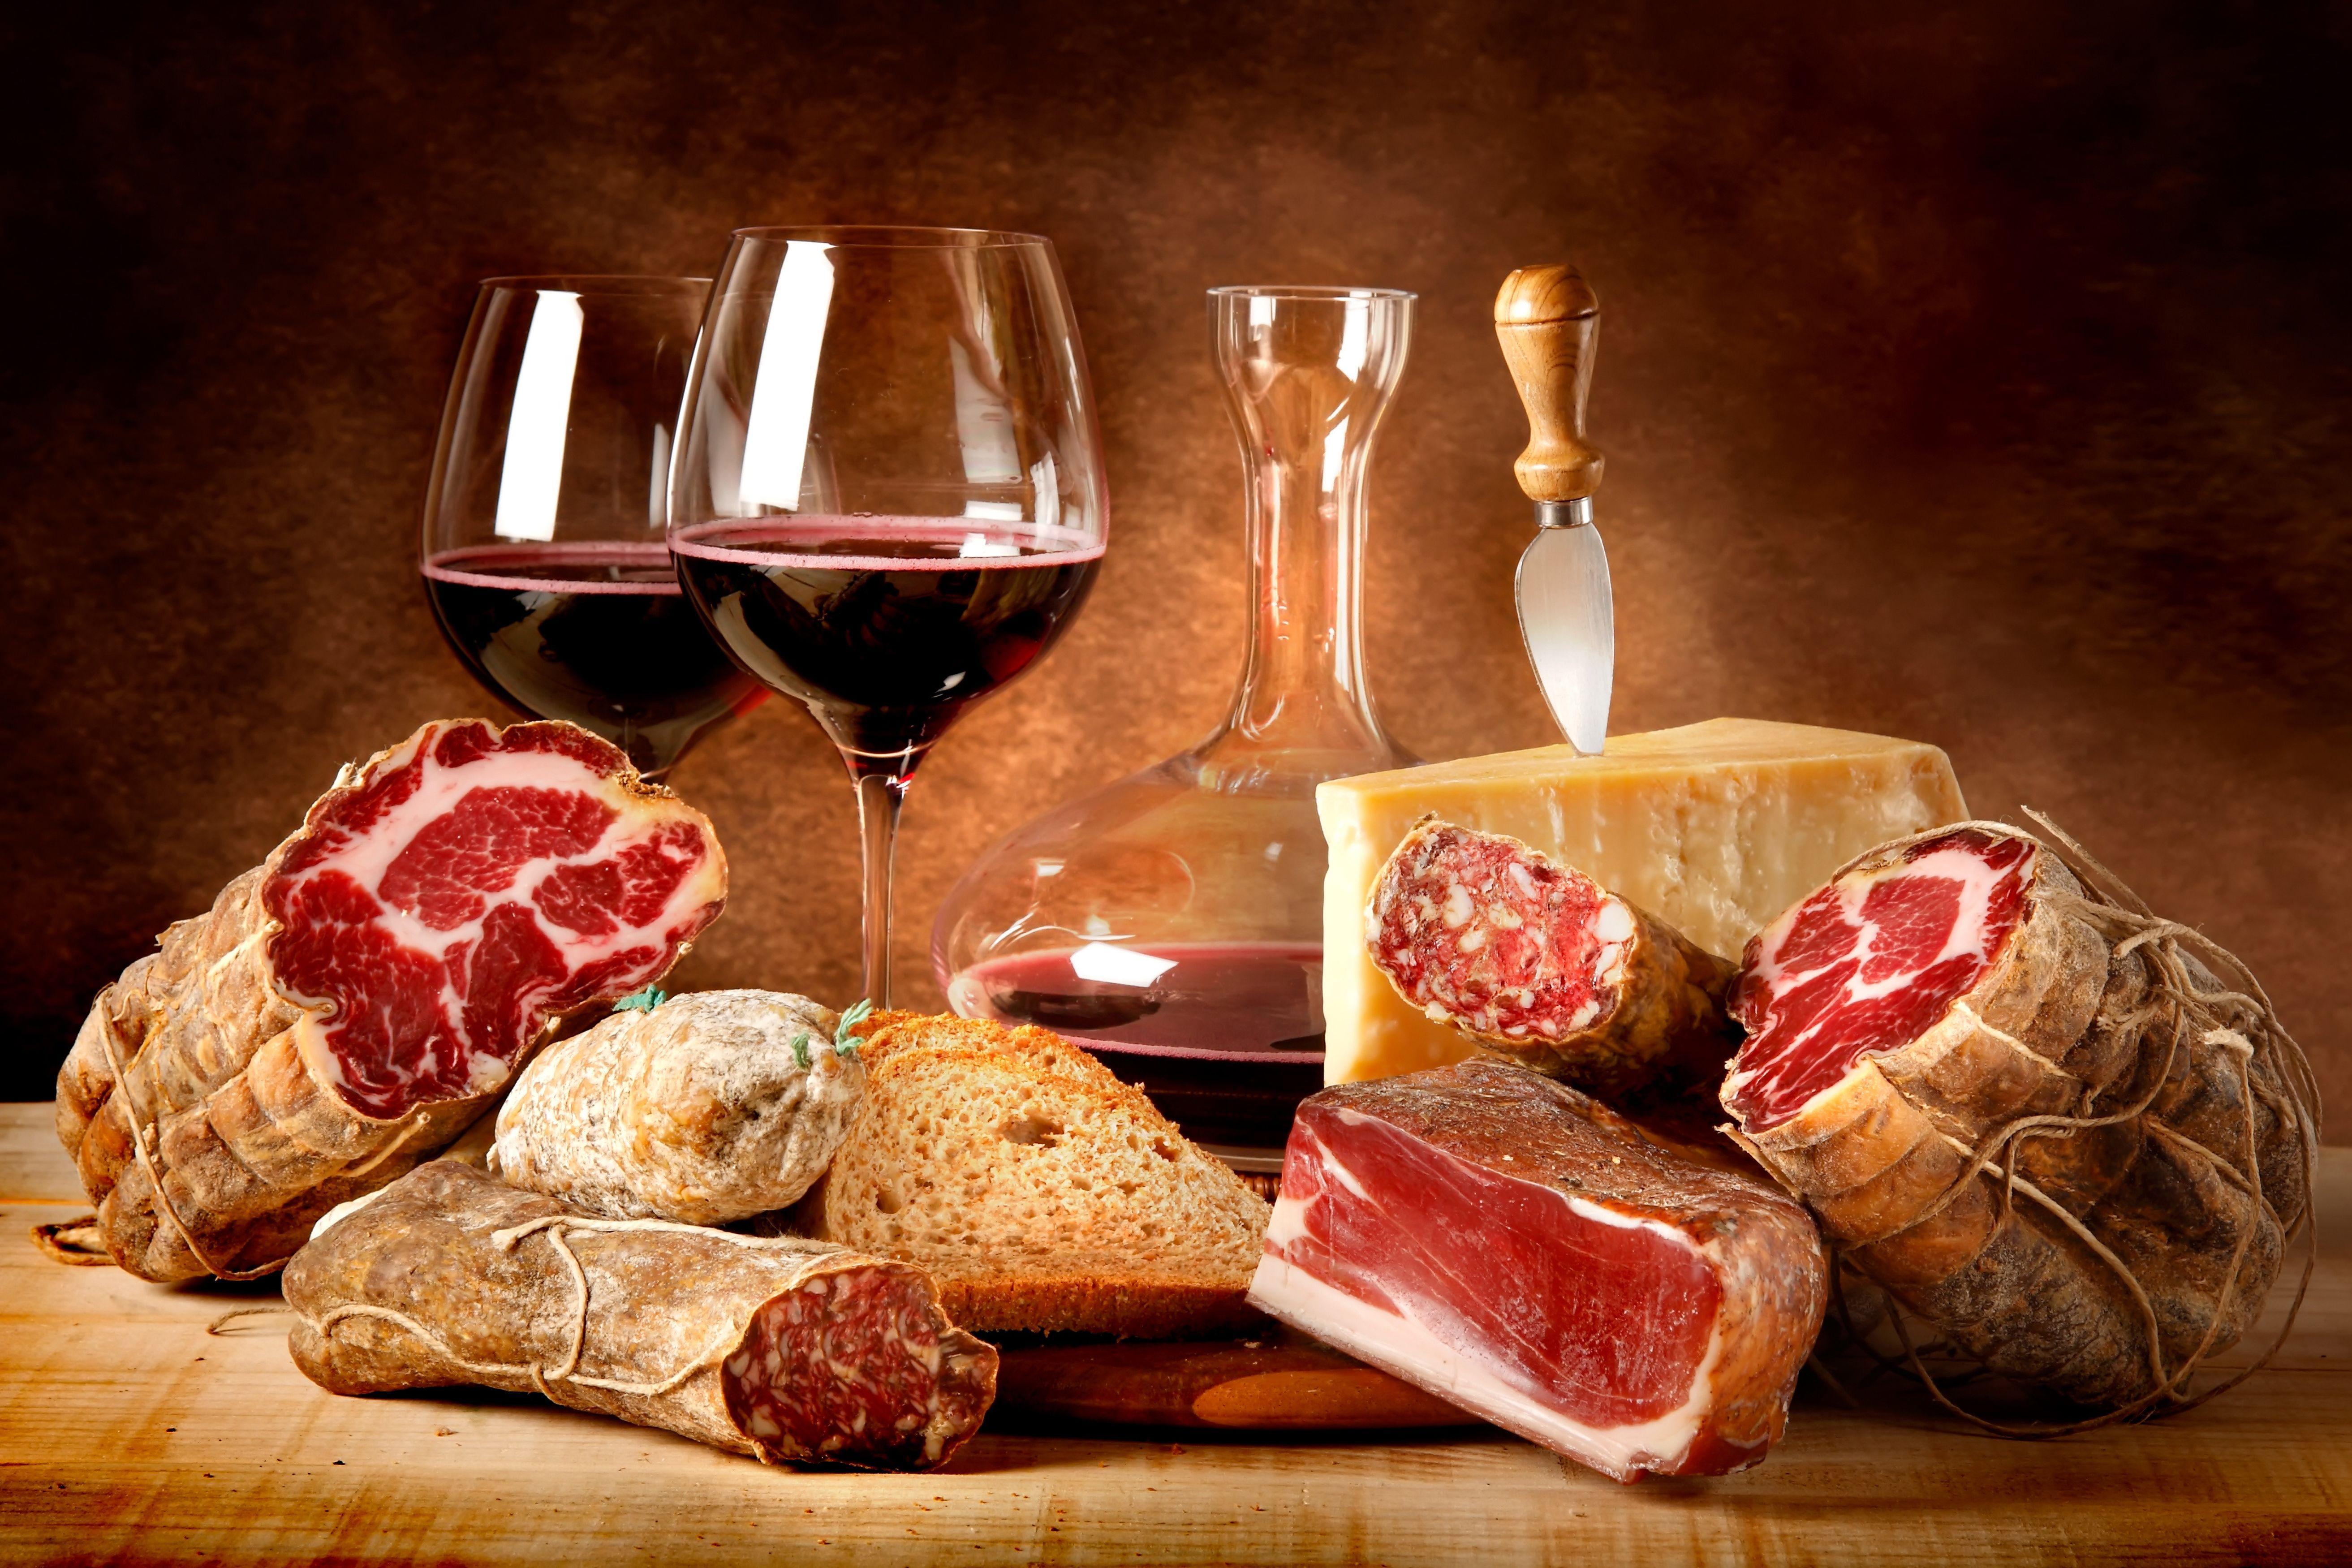 knife, wine, meat wallpaper and image, picture, photo